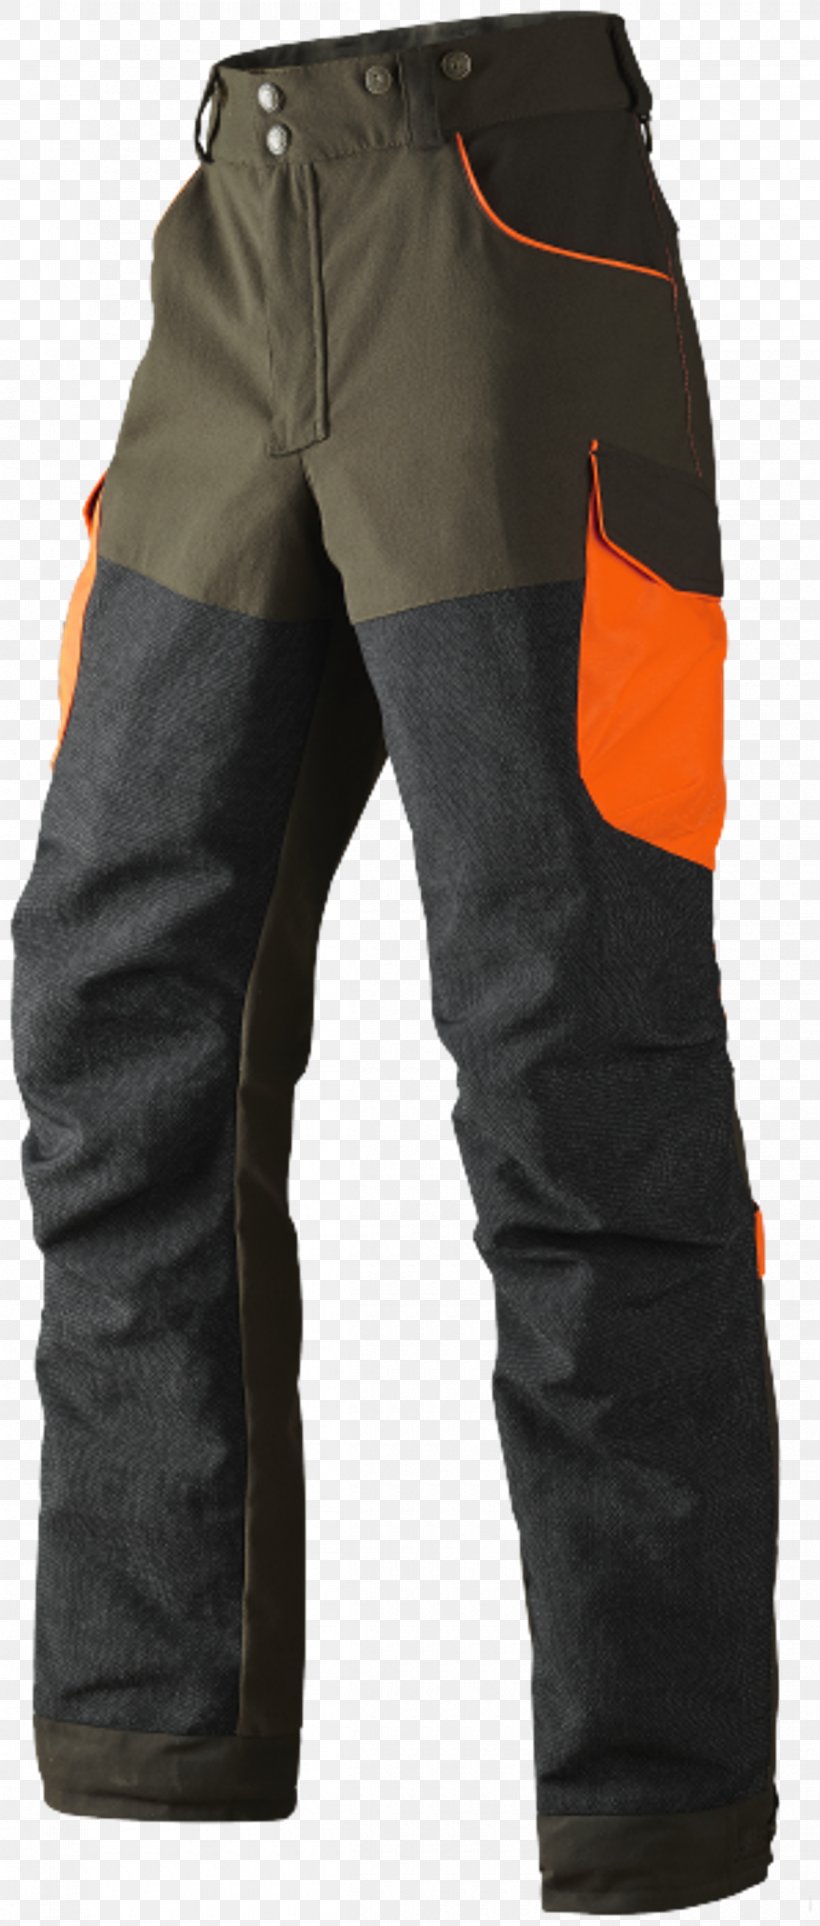 Wild Boar Boar Hunting Pants Clothing, PNG, 1200x2819px, Wild Boar, Boar Hunting, Clothing, Denim, Fur Download Free